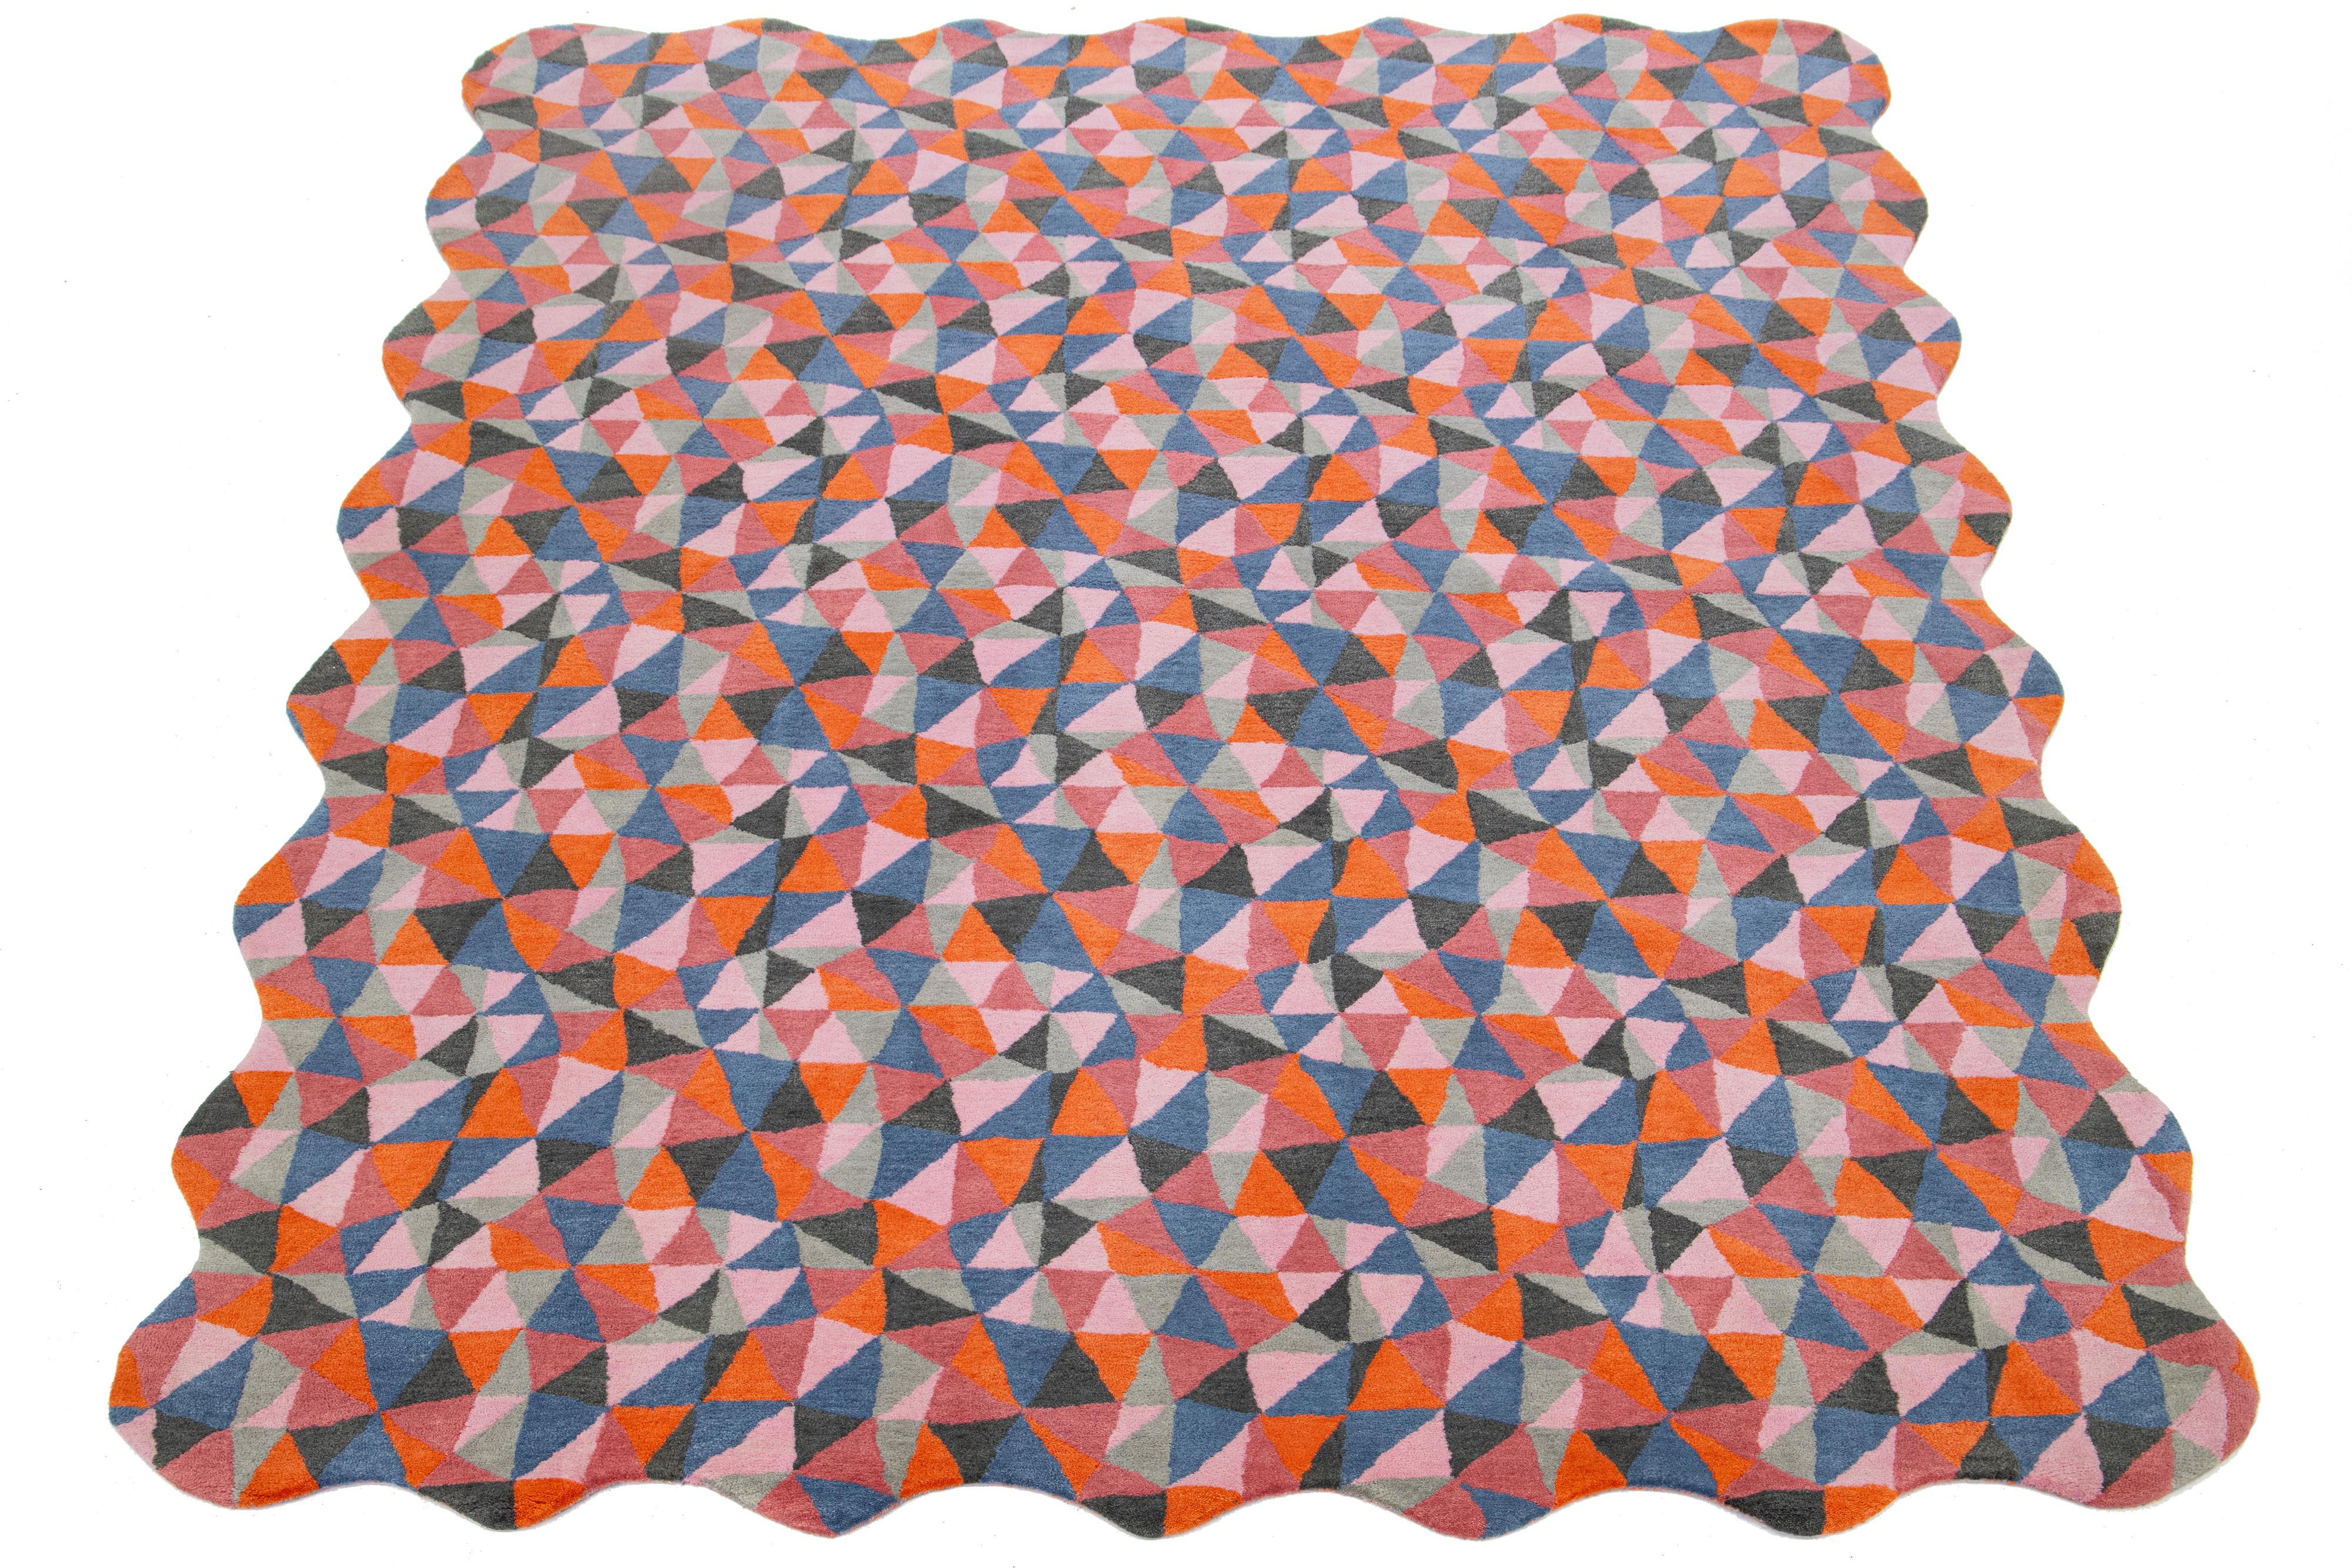 This beautiful, modern hand-tufted wool rug is part of our Laura Gottwald for Apadana Collection and features orange, blue, pink, and gray fields. This Mosaico design: A kaleidoscopic repeat pattern of free-hand triangles, Mosaico is reminiscent of